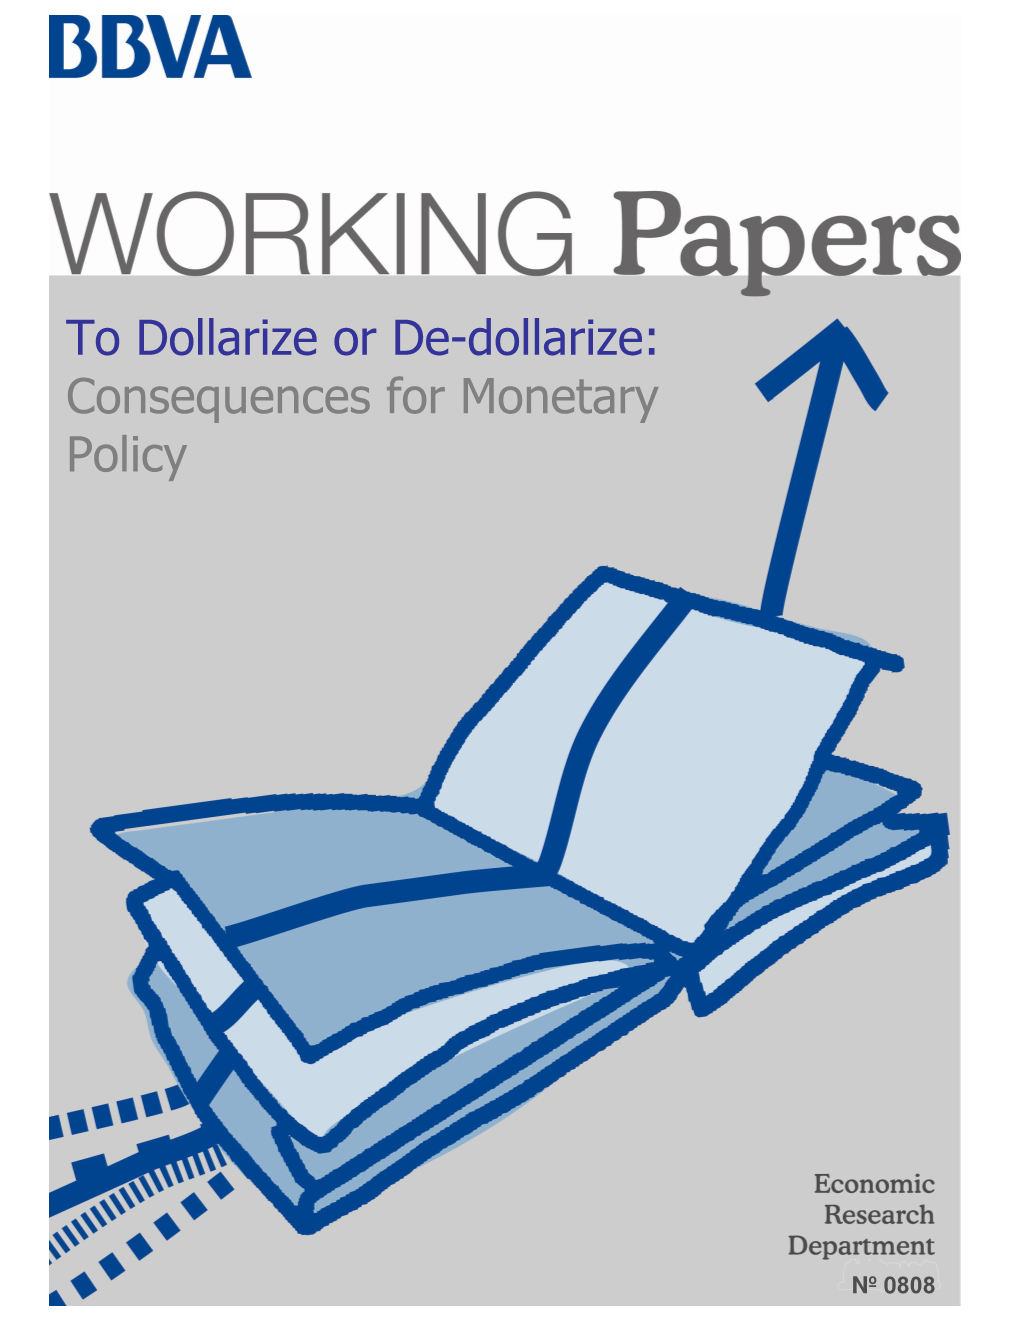 To Dollarize Or De-Dollarize: Consequences for Monetary Policy